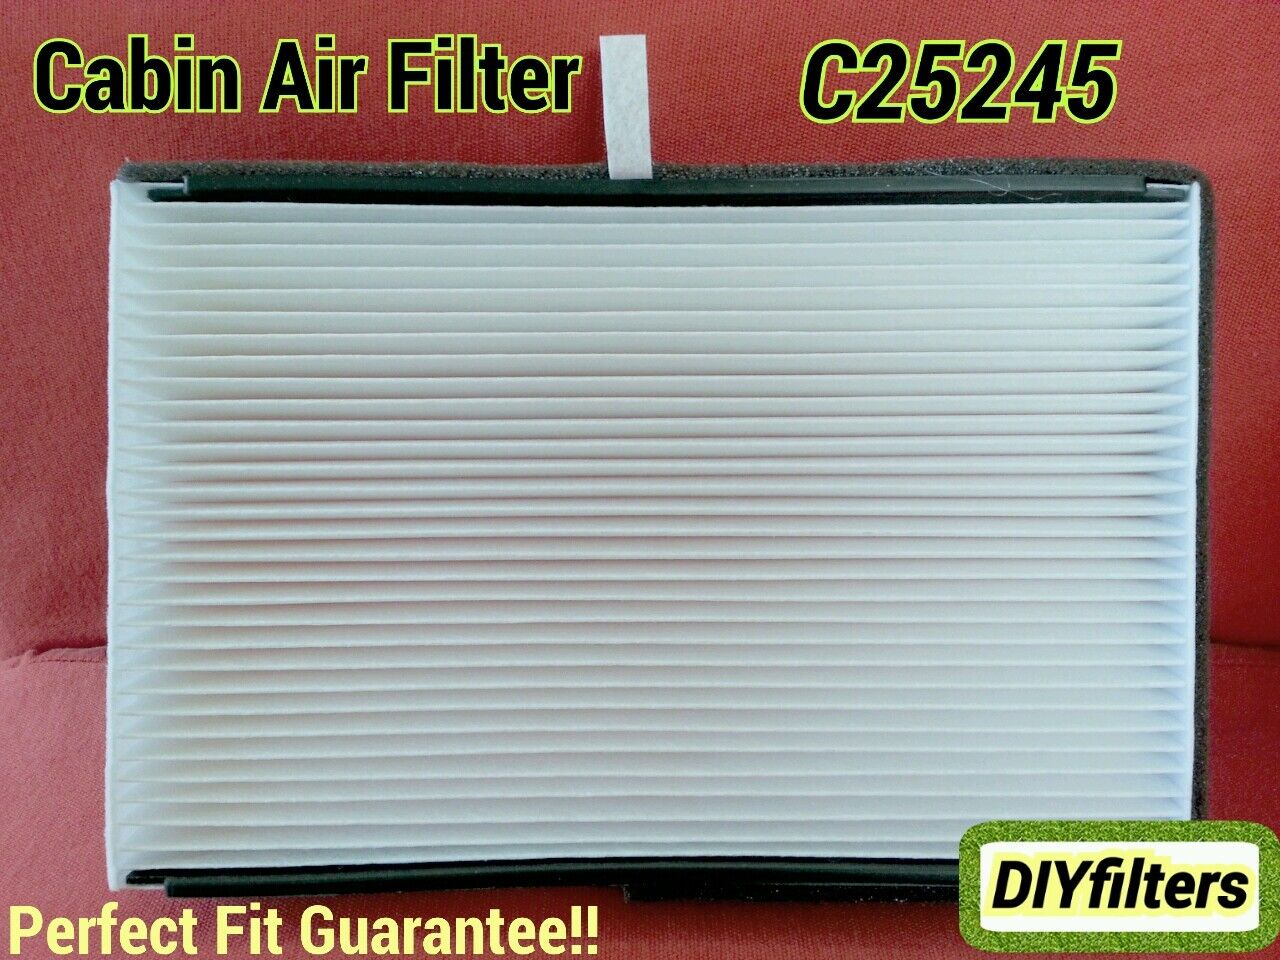 CABIN AIR FILTER For Buick Regal Chevy Monte Carlo Fast Ship